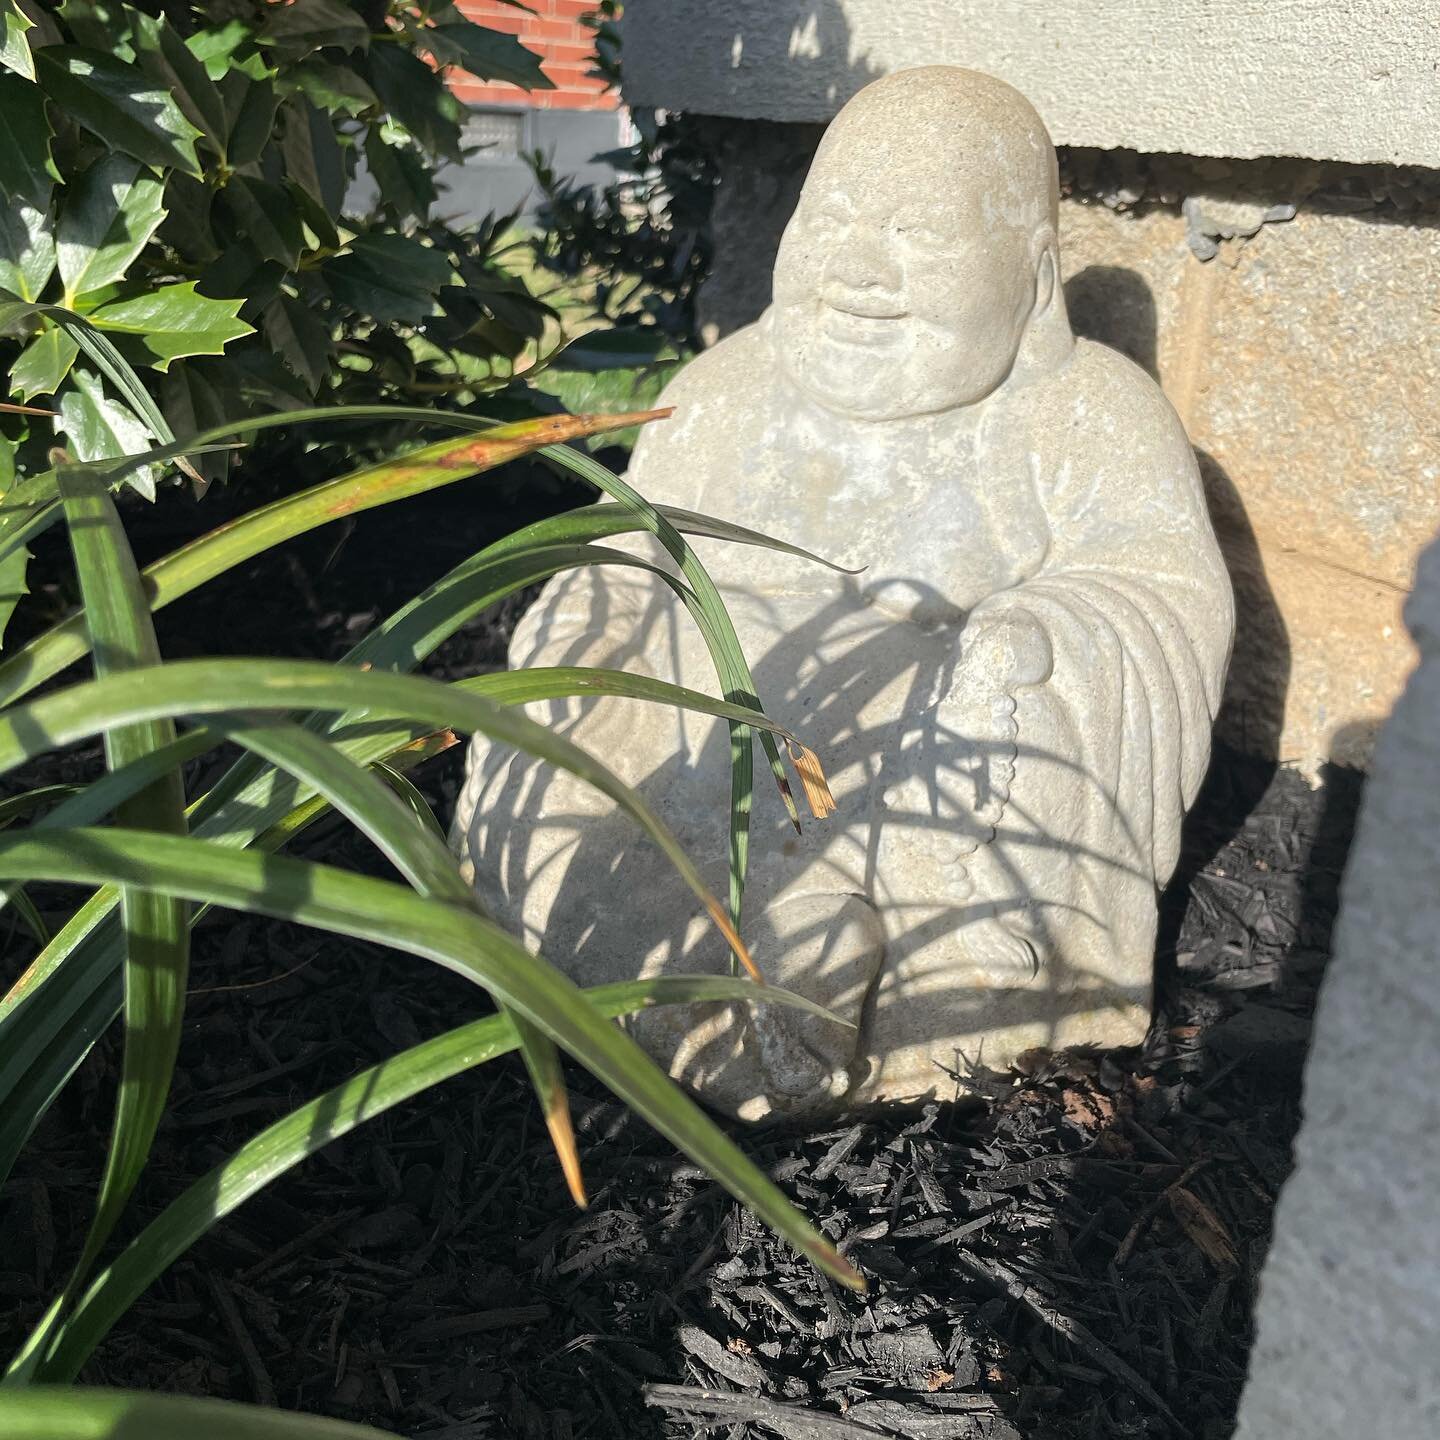 Some fresh mulch for the Buddha to rest in. Spring is almost here. It&rsquo;s time to give your landscaping some attention. 🧘🏻🙌🏼
&bull;
&bull;
&bull;
&bull;
&bull;
#mulching 
#landscapebeds 
#prunning 
#shrubs 
#nashvillelandscaping